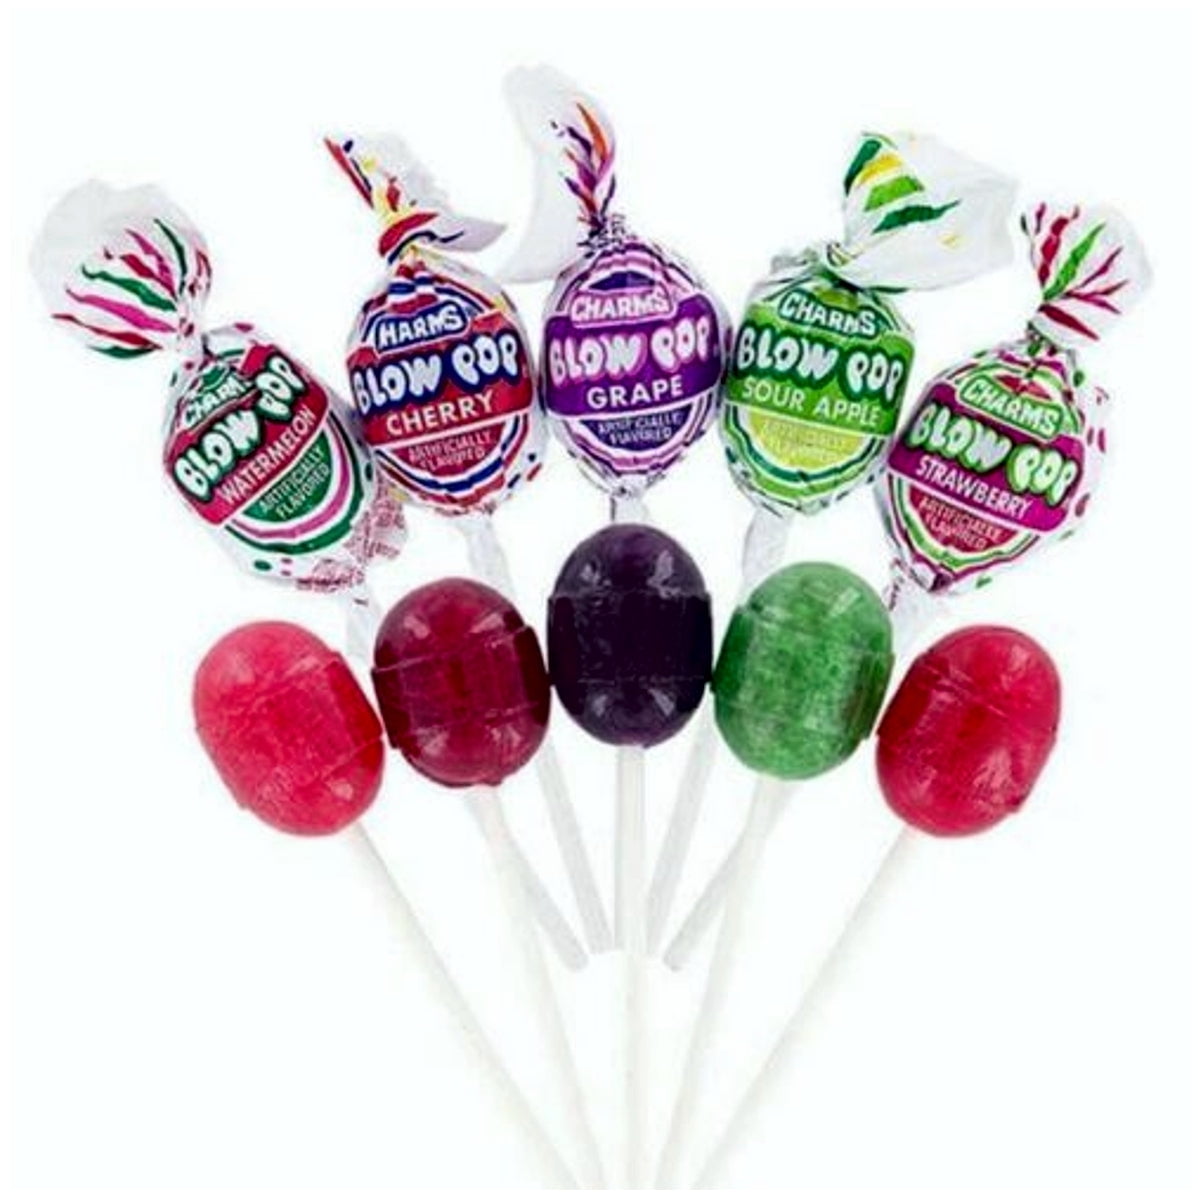  16 Pc Charms Sweet Pops Lollipops Colorful Sucker Stick Candy  Lollypops Party : Grocery & Gourmet Food